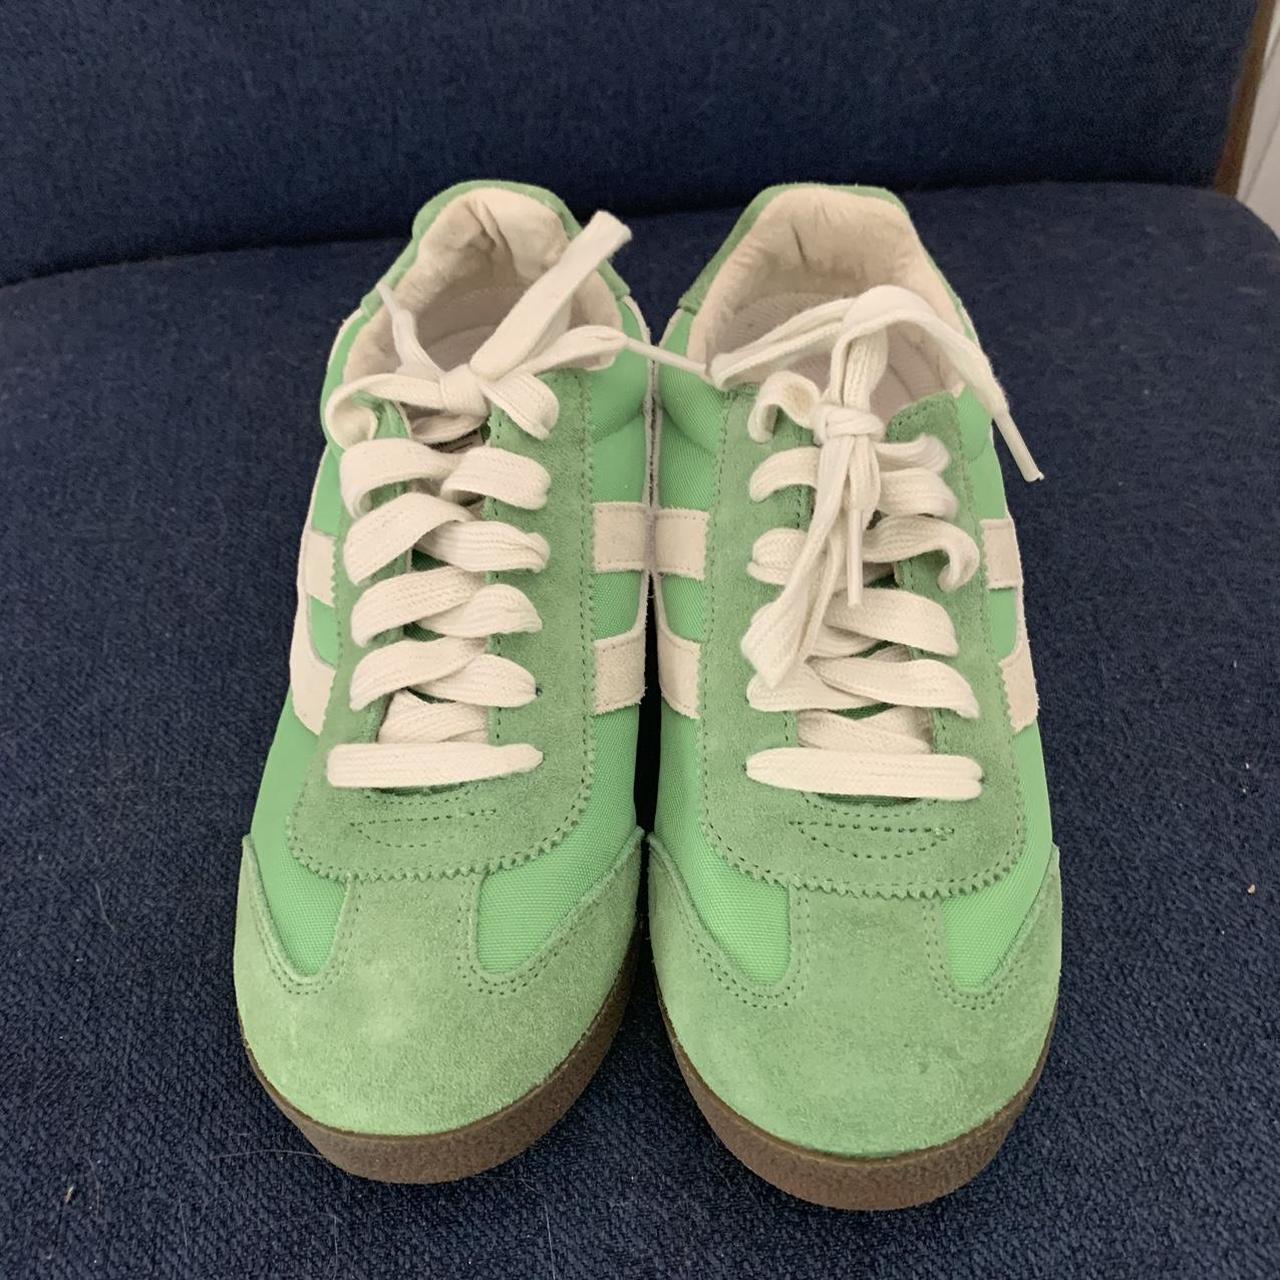 American Eagle Outfitters Women's Sneakers - Green - US 7